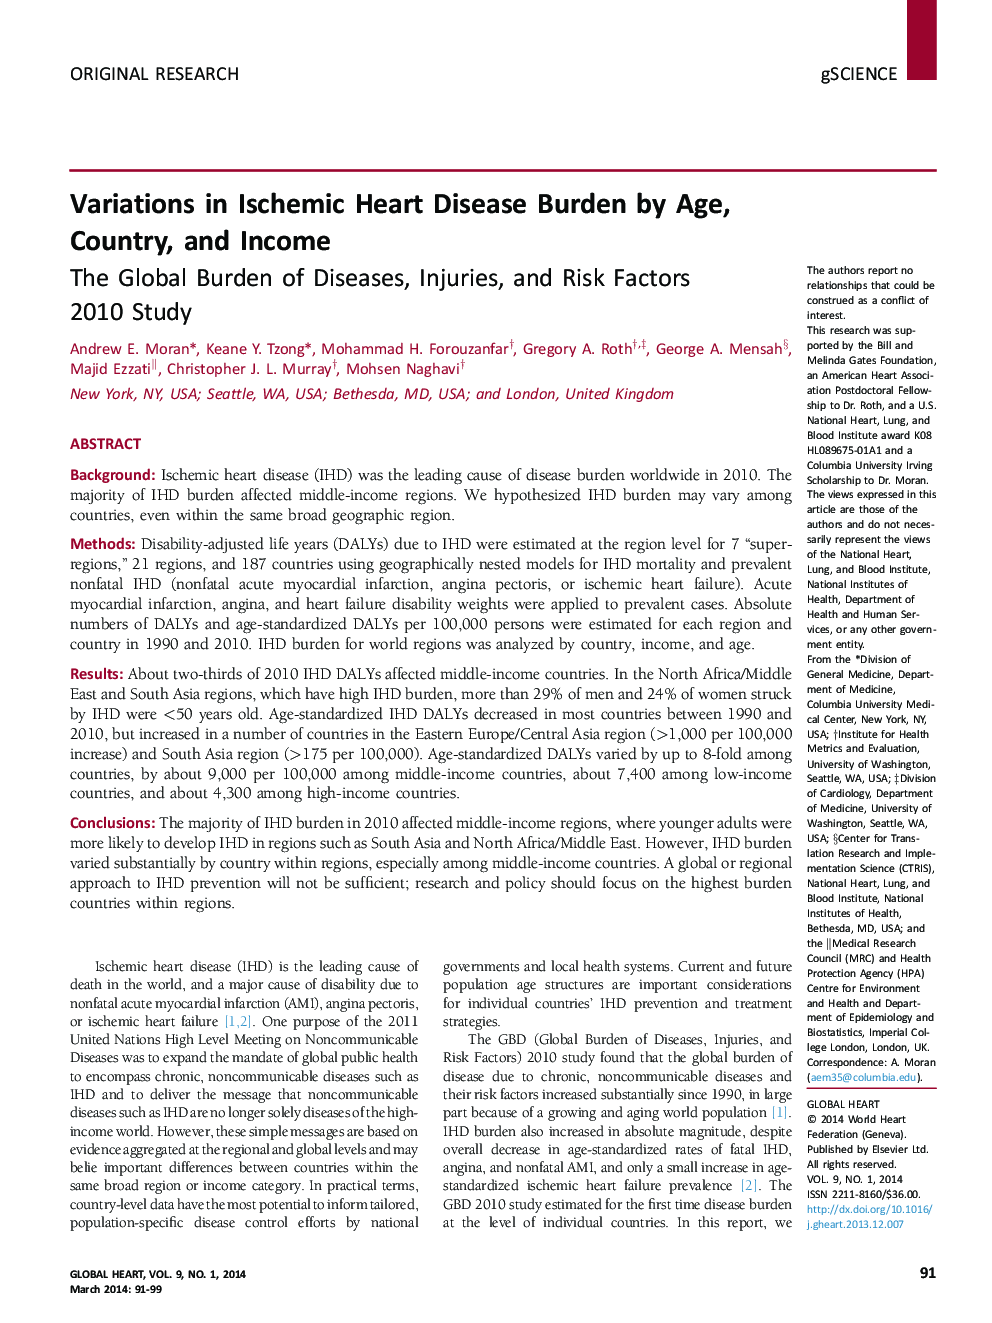 Variations in Ischemic Heart Disease Burden by Age, Country, and Income: The Global Burden of Diseases, Injuries, and Risk Factors 2010 Study